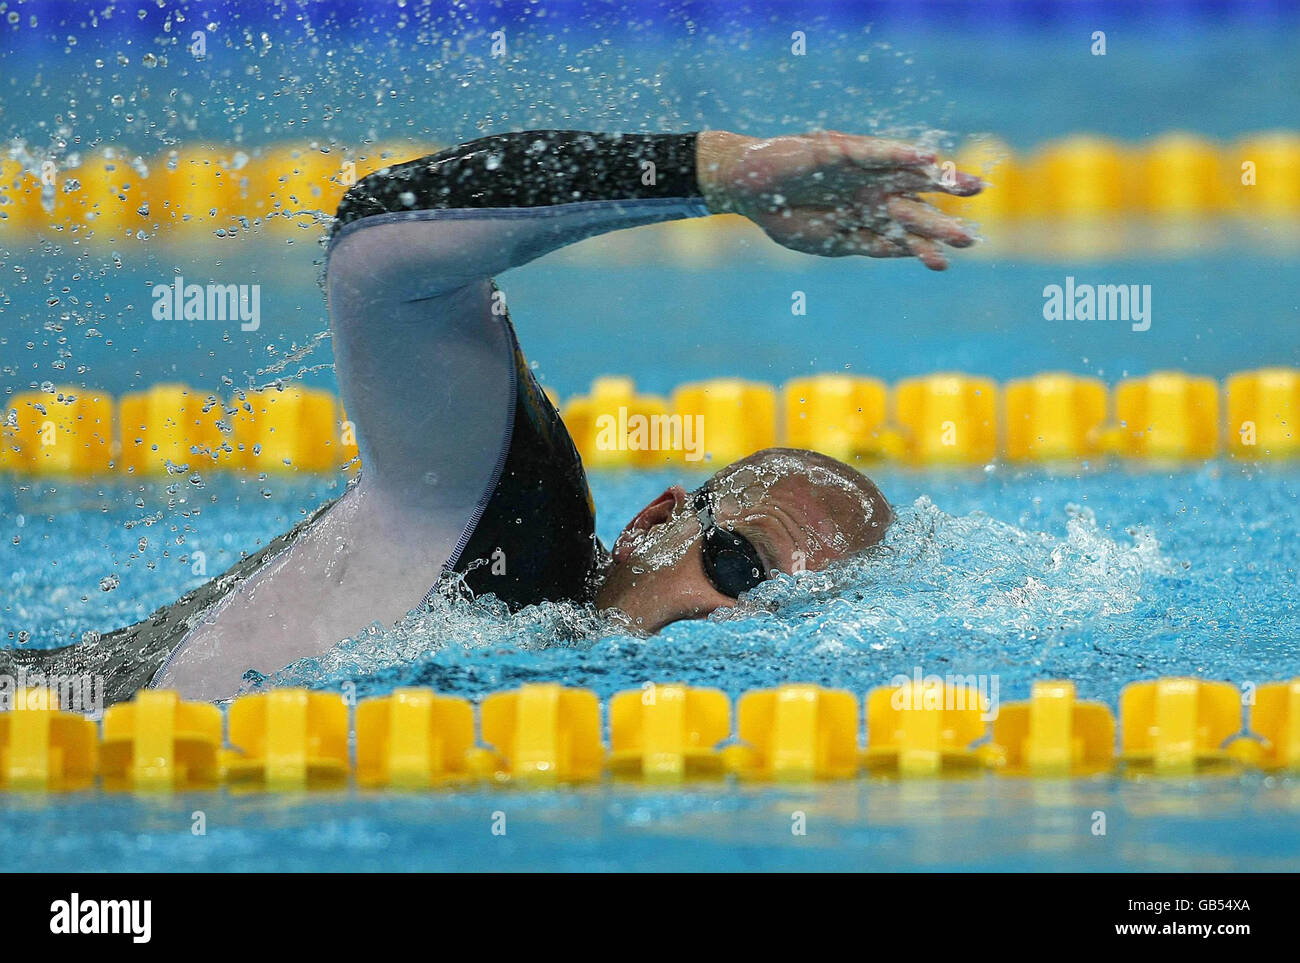 Gold Medal winner Anders Olsson in the men's 400M Freestyle in the National Acquatic Centre, Beijing. Stock Photo